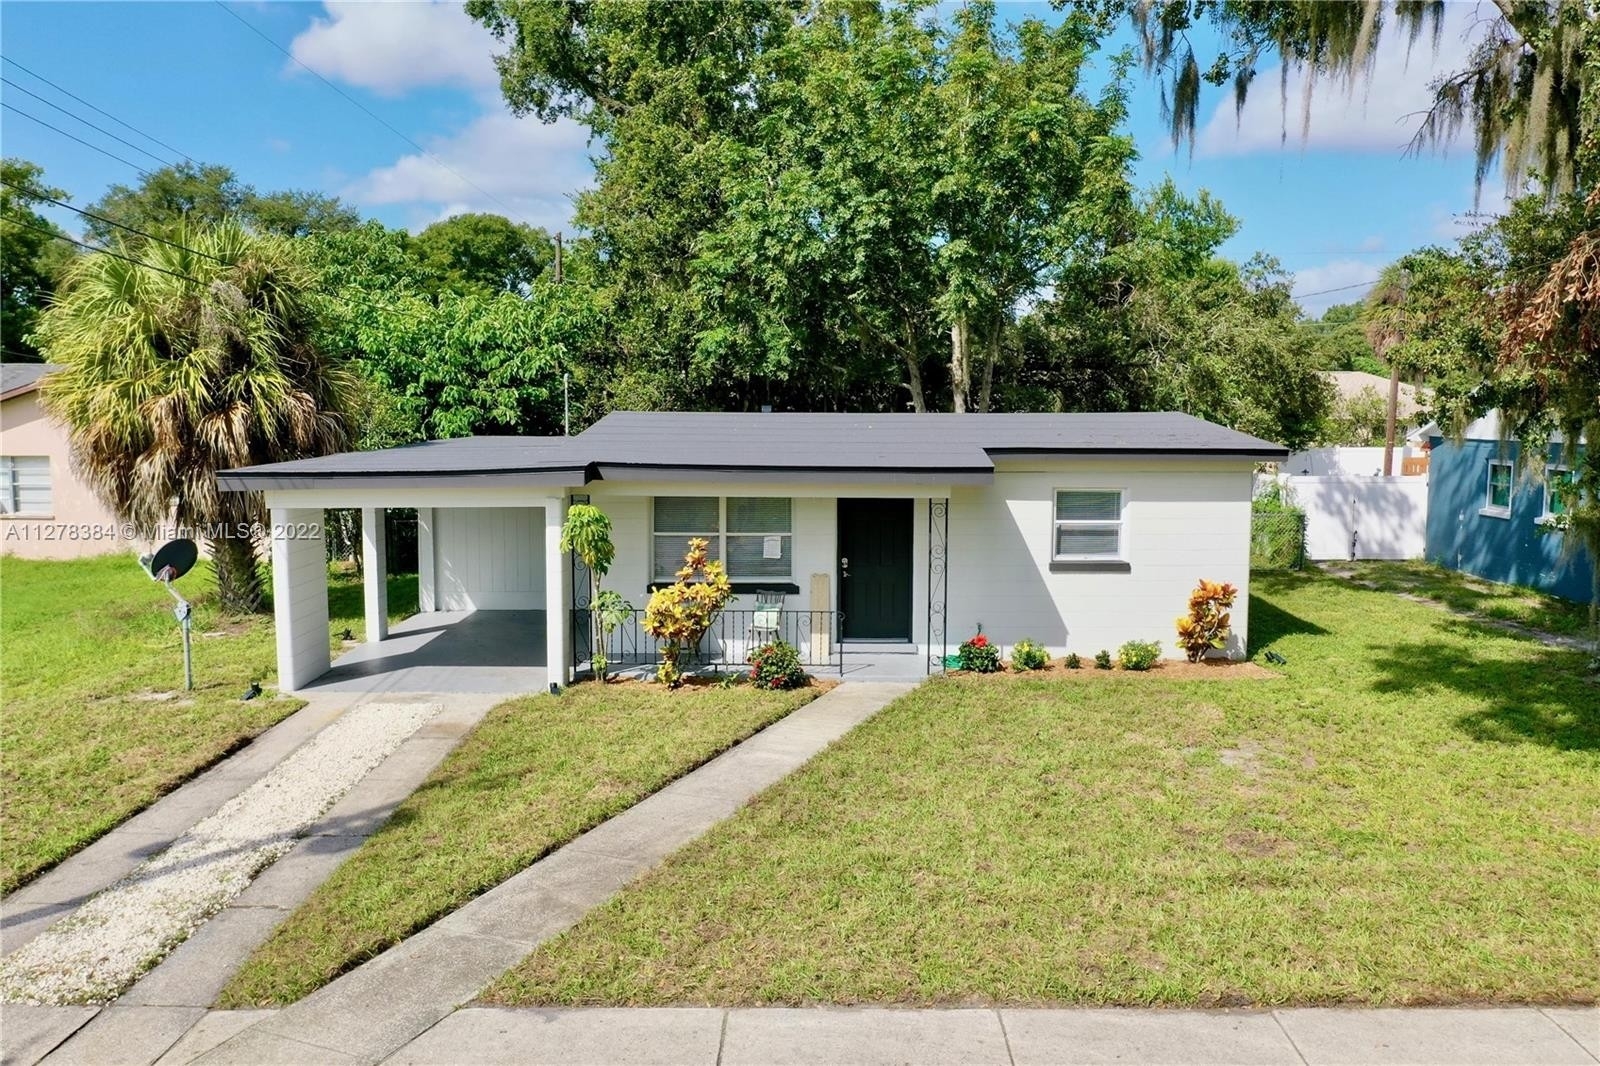 37. Single Family Homes for Sale at Address Not Available Lakeland, FL 33801